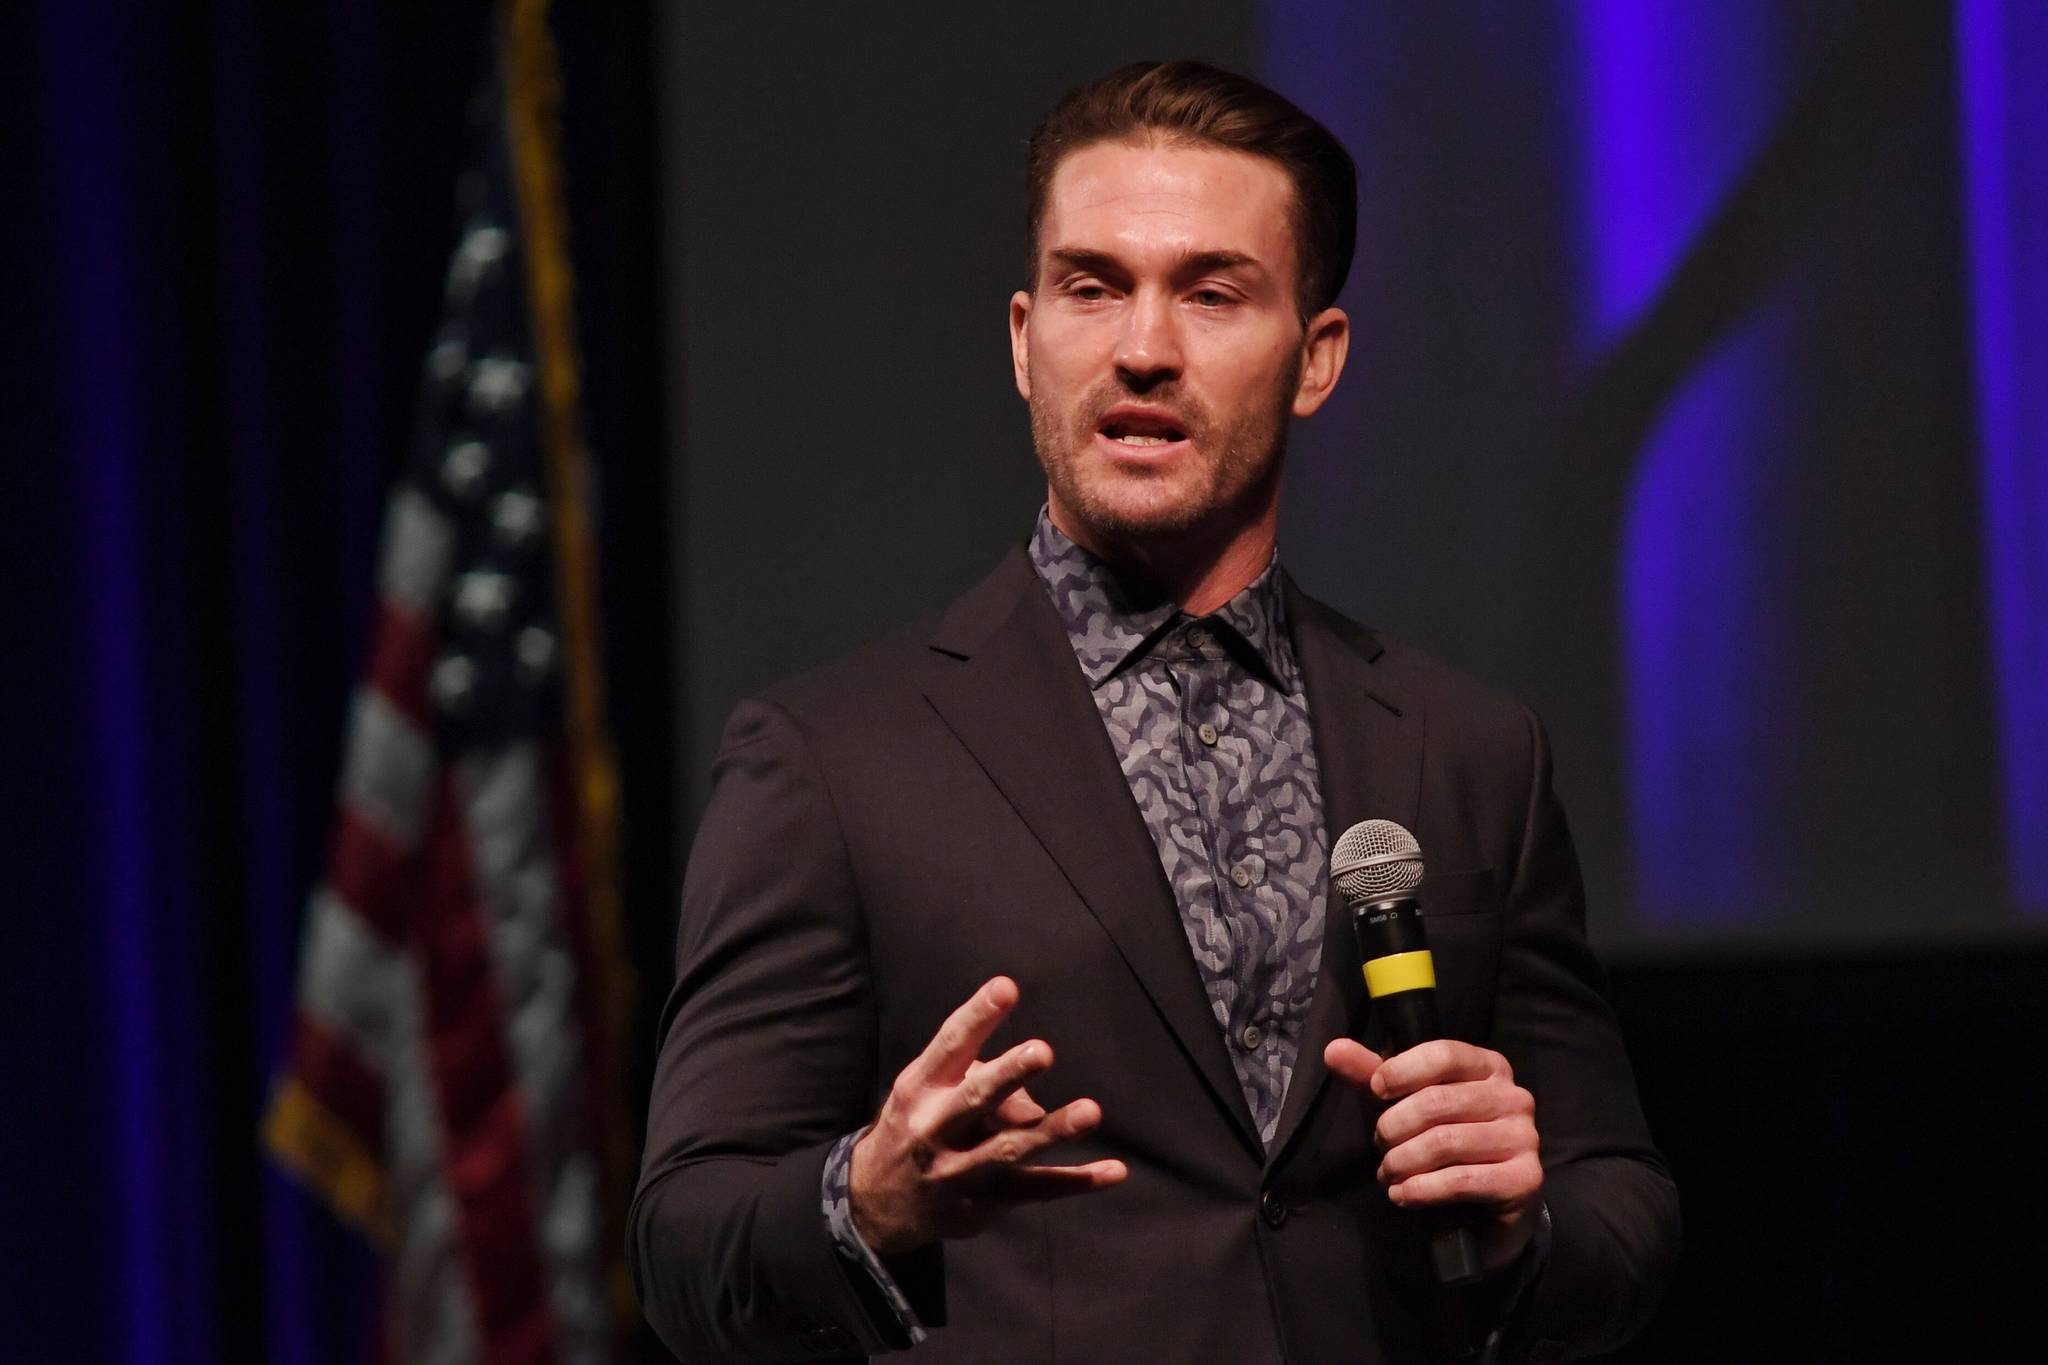 Tony Hoffman, former BMX Elite Pro racer and recovering drug addict, speaks at the Pillars of America event at Centennial Hall on Wednesday, April 24, 2019.The event is the second of three in the series sponsored by the Juneau Glacier Valley Rotary Club. (Michael Penn | Juneau Empire)